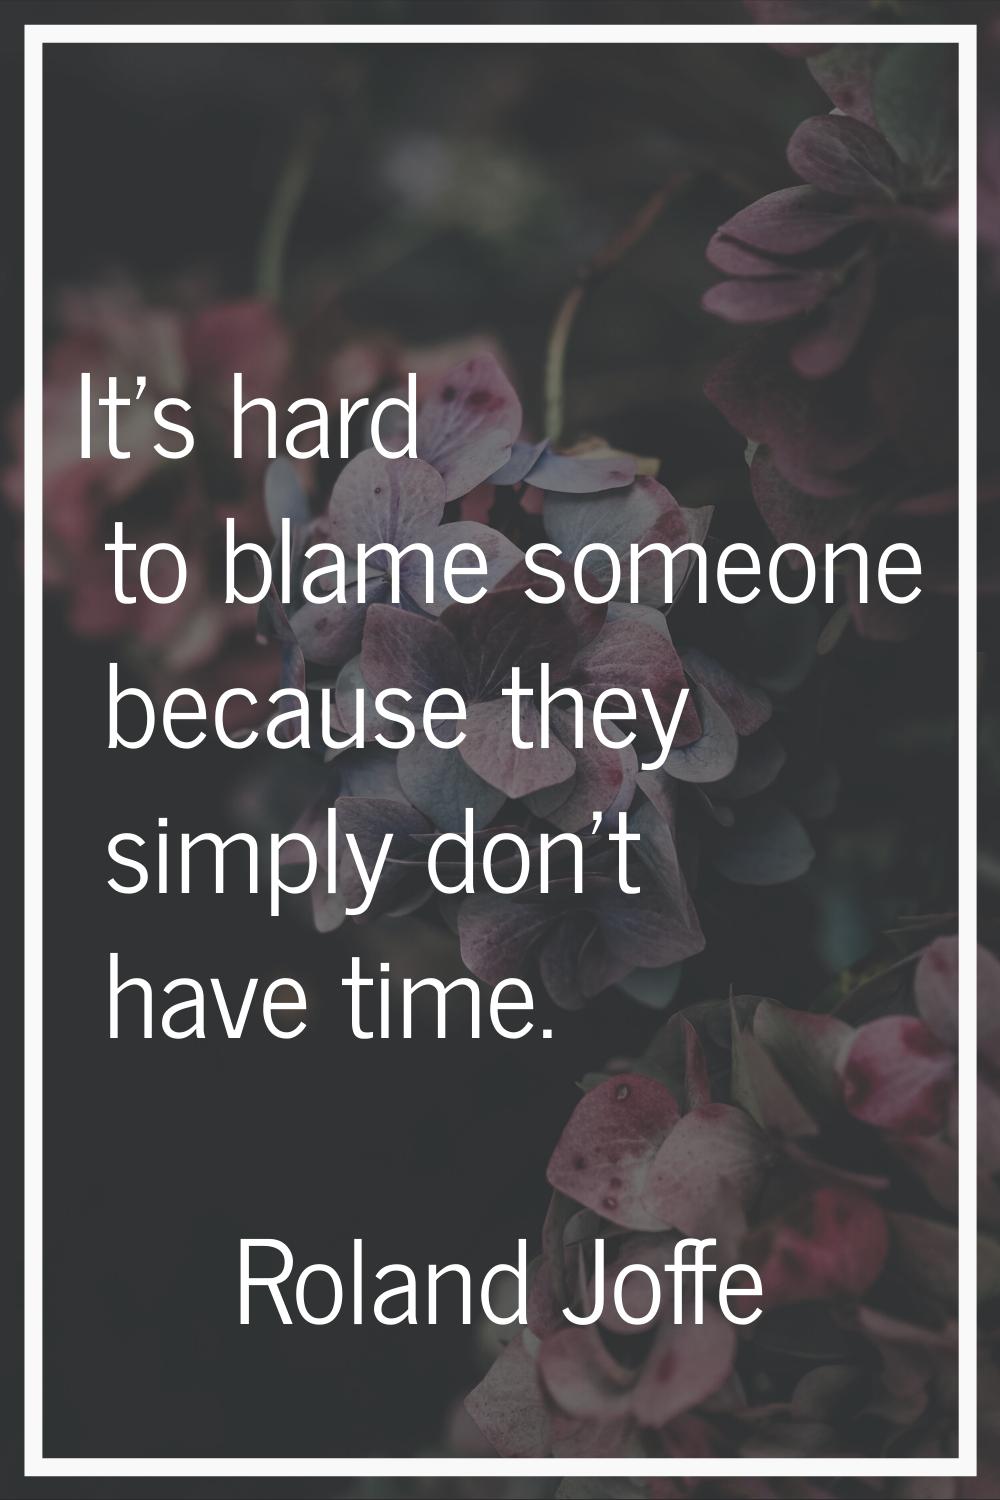 It's hard to blame someone because they simply don't have time.